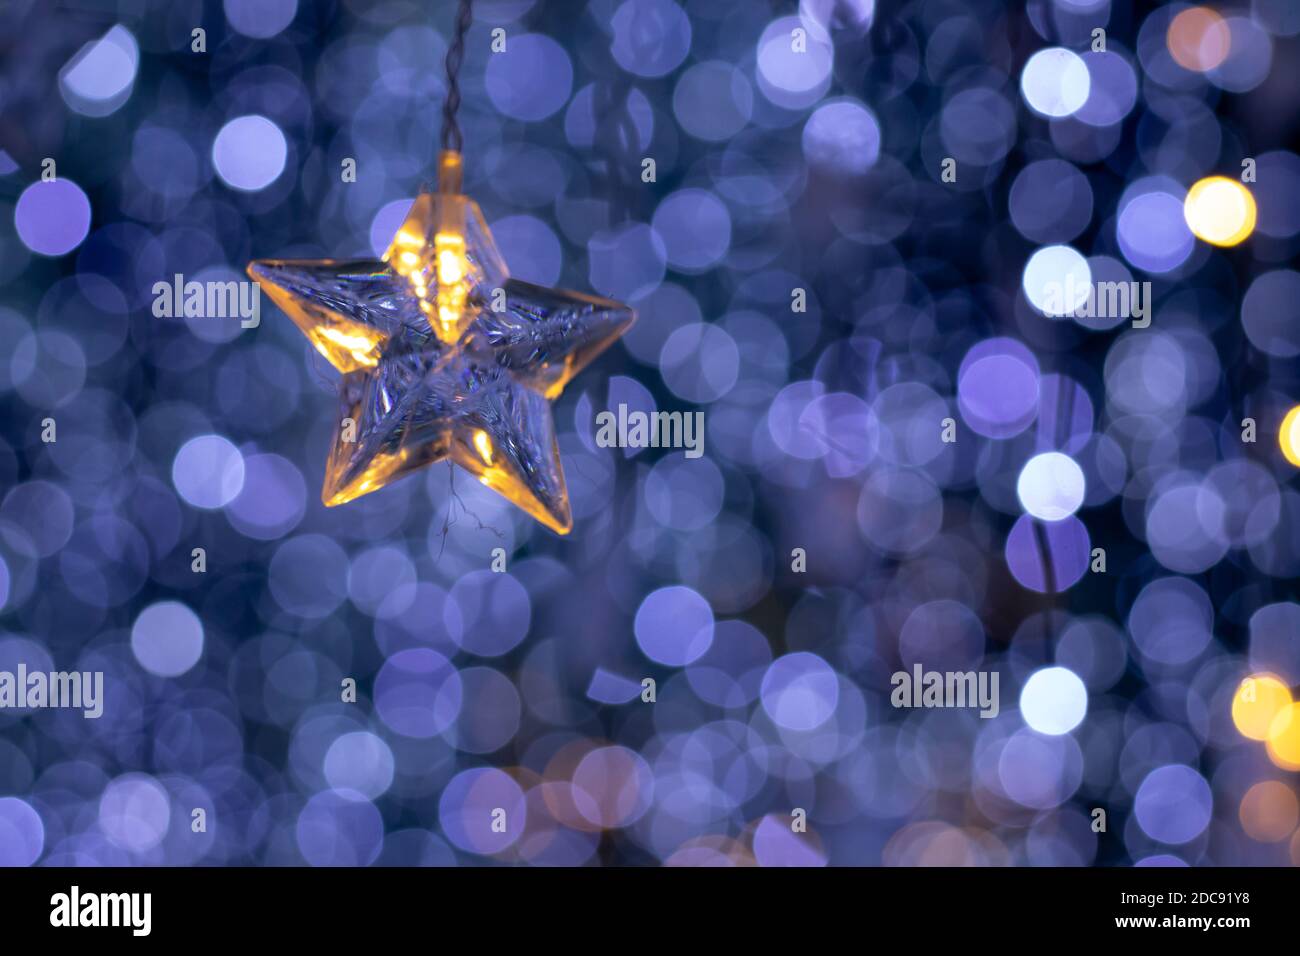 Rain of bokeh lights and a star shaped ornament with a dark bluish background Stock Photo